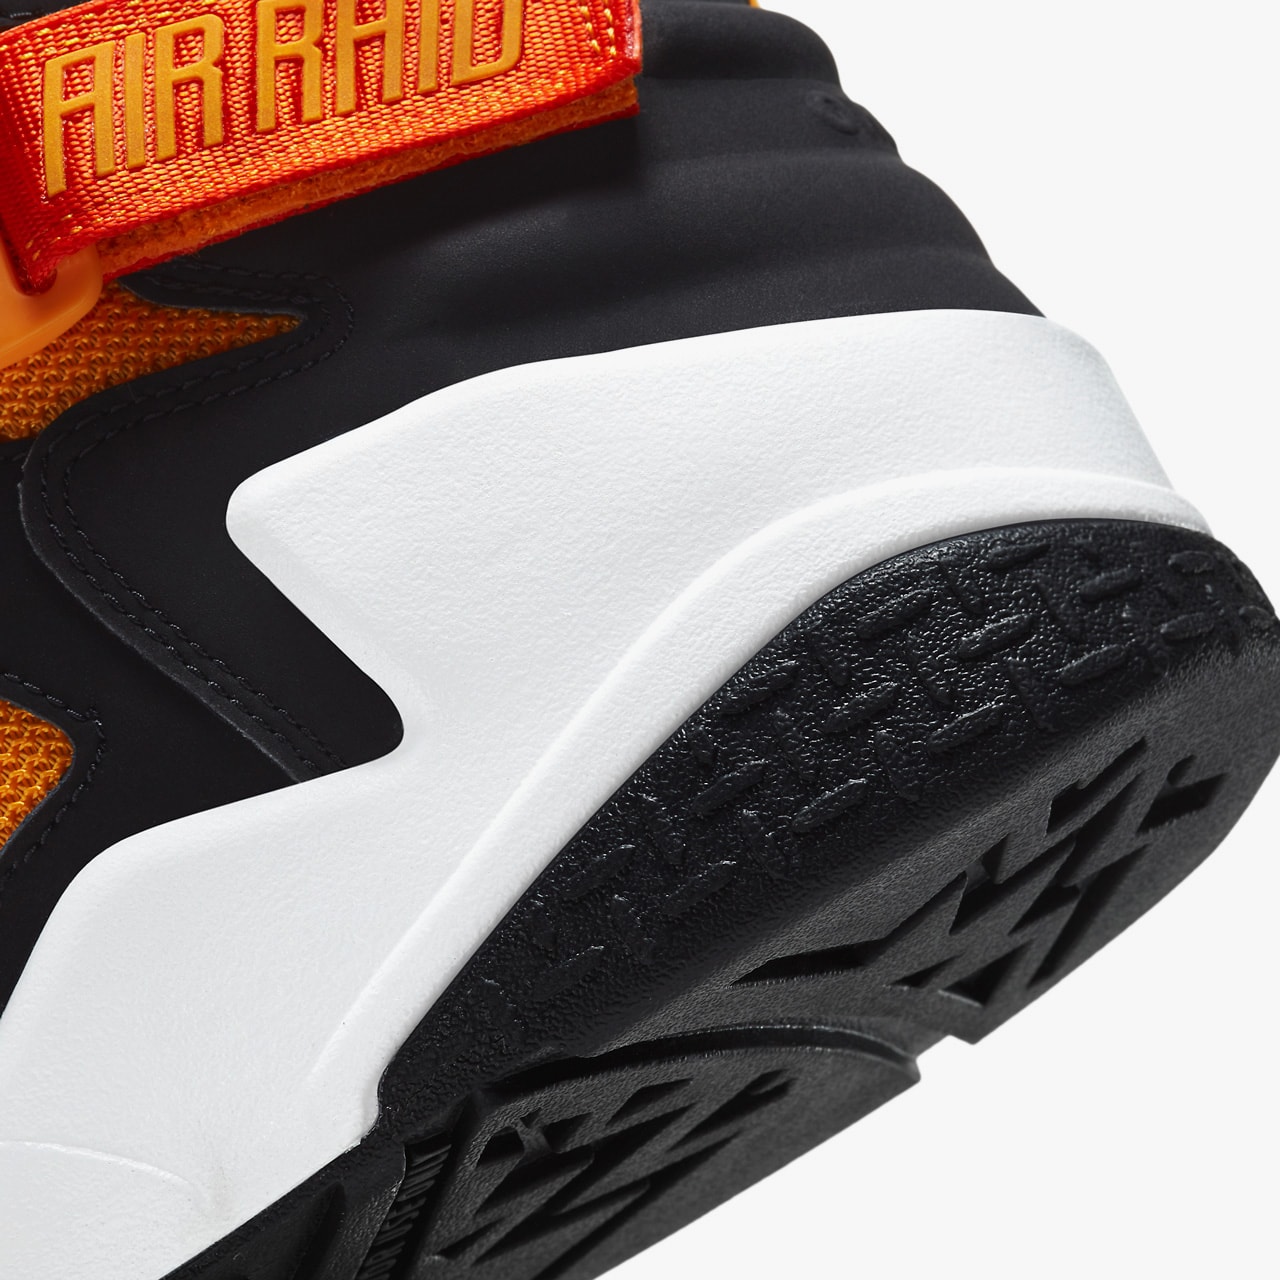 nike sportswear air raid roswell rayguns yellow orange green black white dd9222 001 official release date info photos price store list buying guide